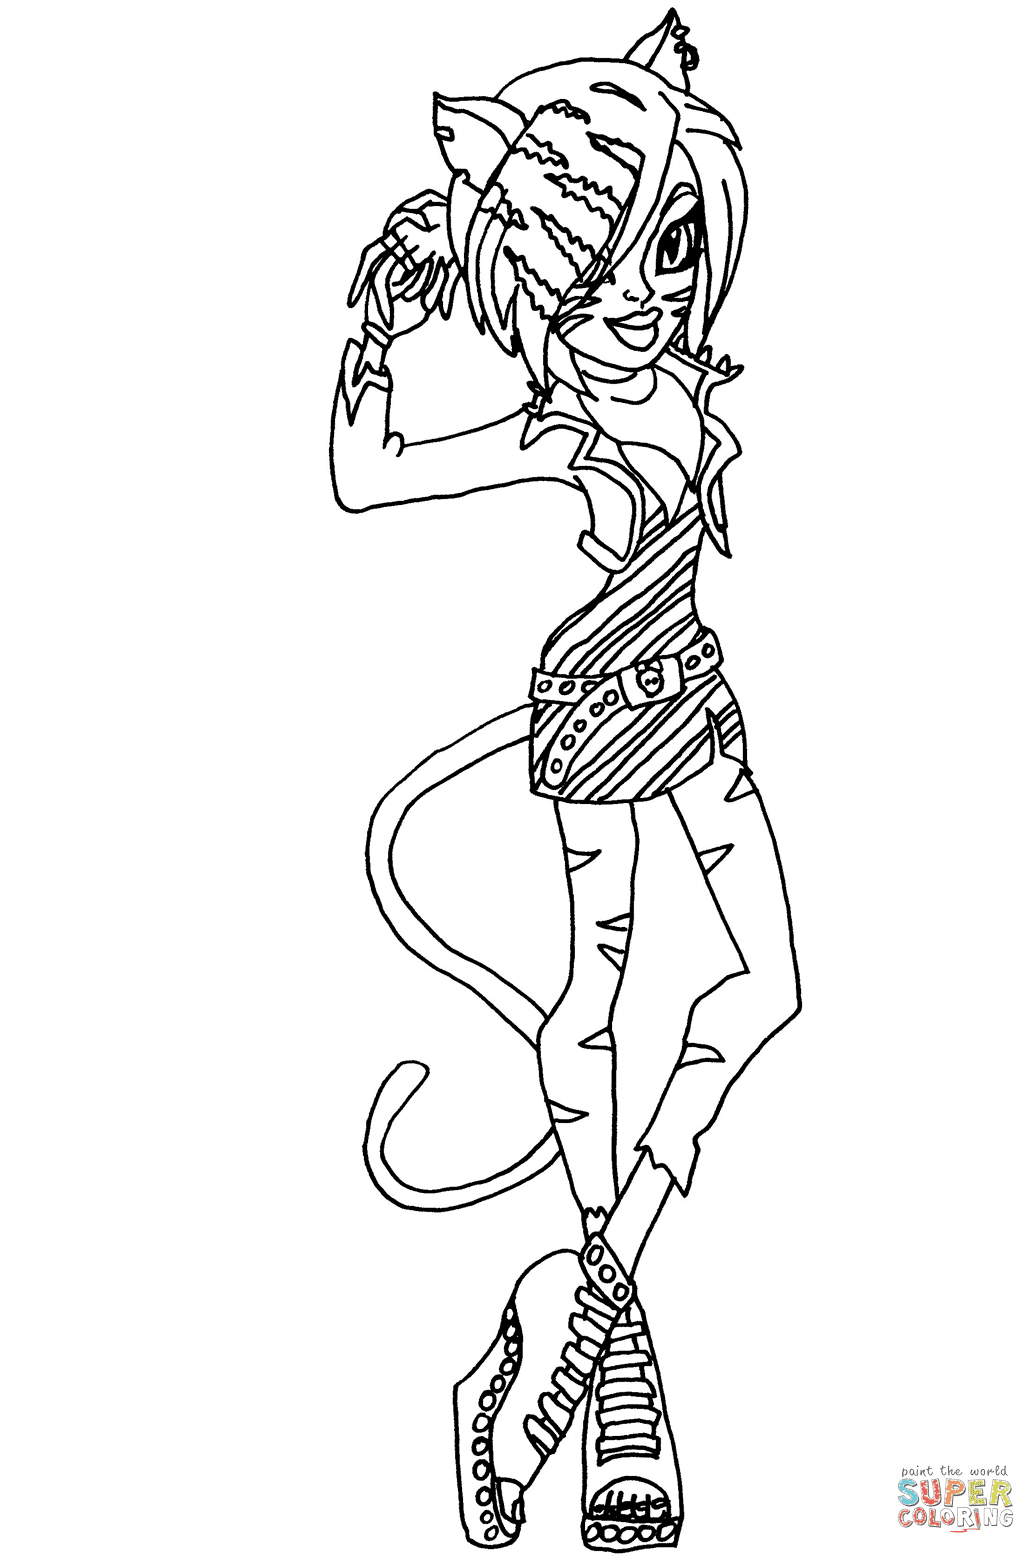 Download New Monster High toralei Stripe Coloring Pages | Thousand of the Best printable coloring pages ...